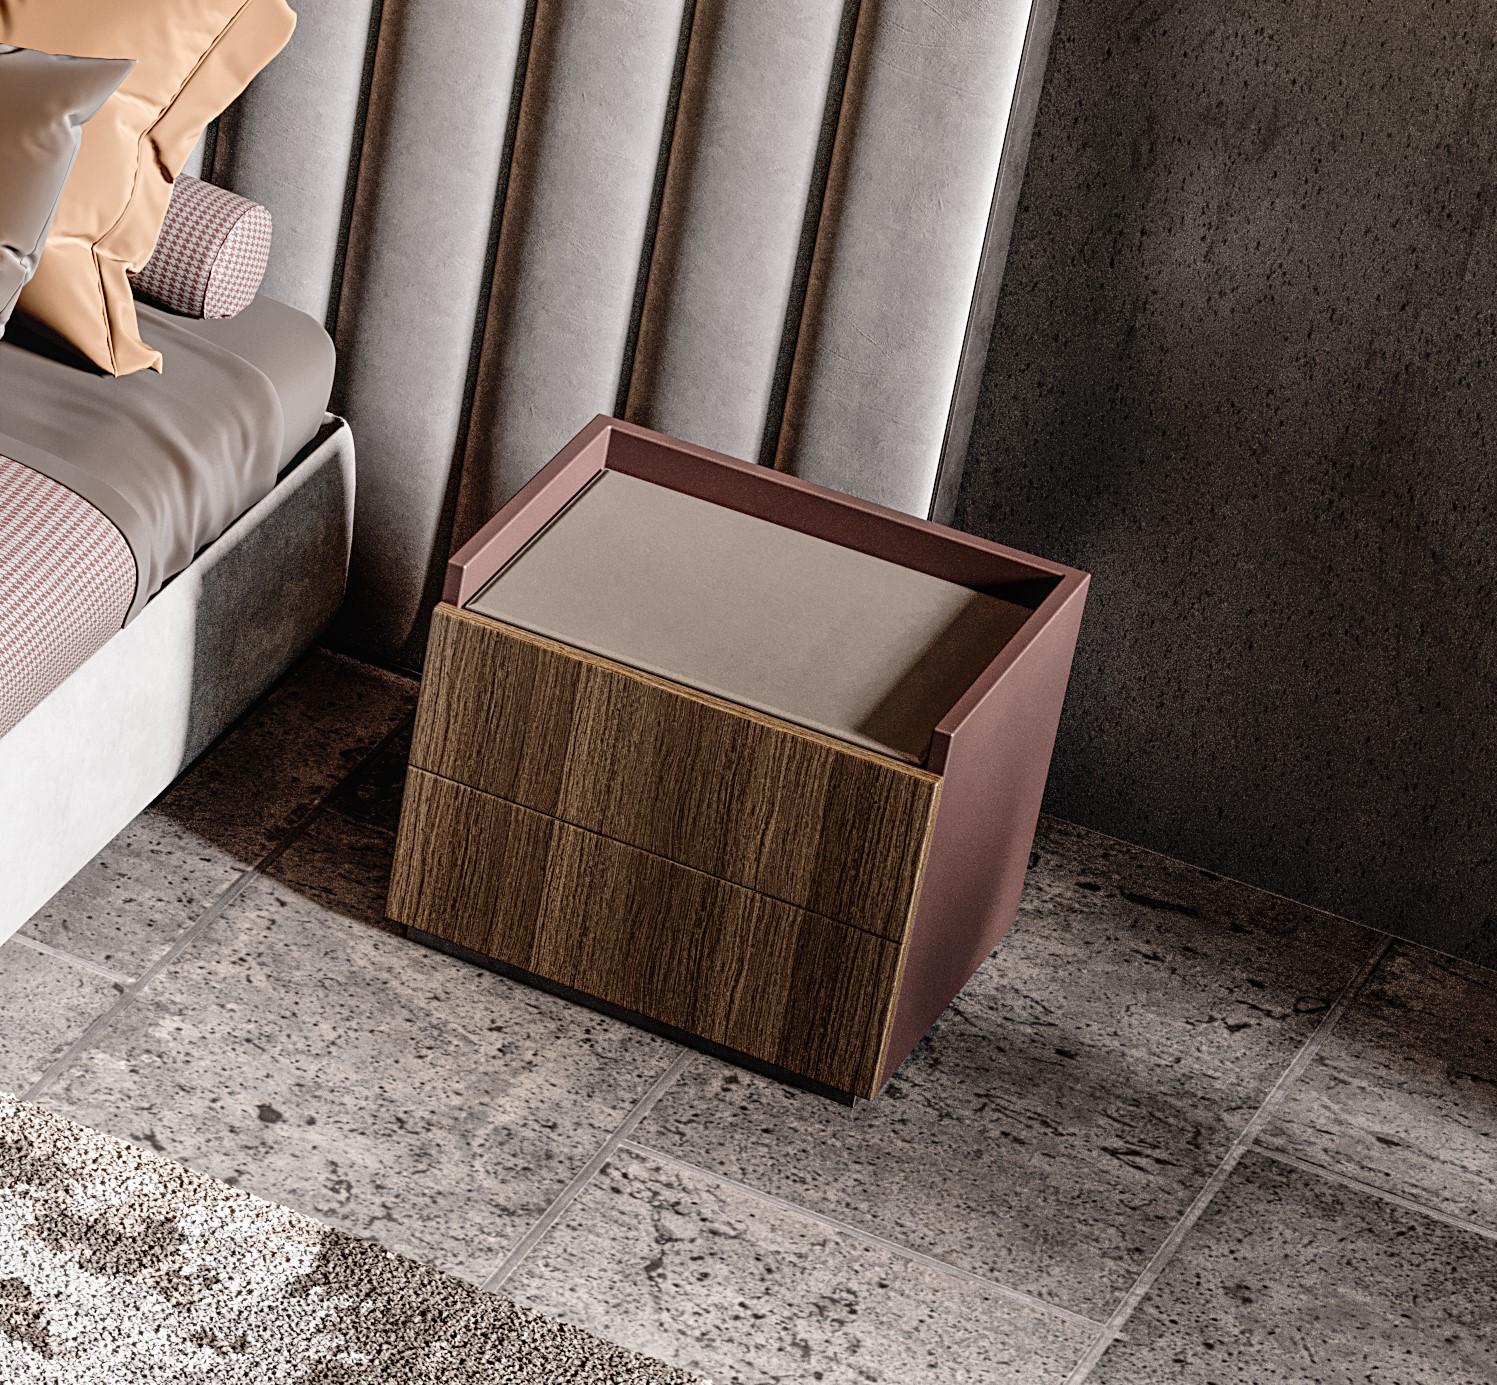 Our Billy nightstands fully transfer the tranquility of an environment of complete relaxation with the timeless elegance of lines, encapsulating simplicity refinement and elegance at the same time. The various types of composition, including woods,